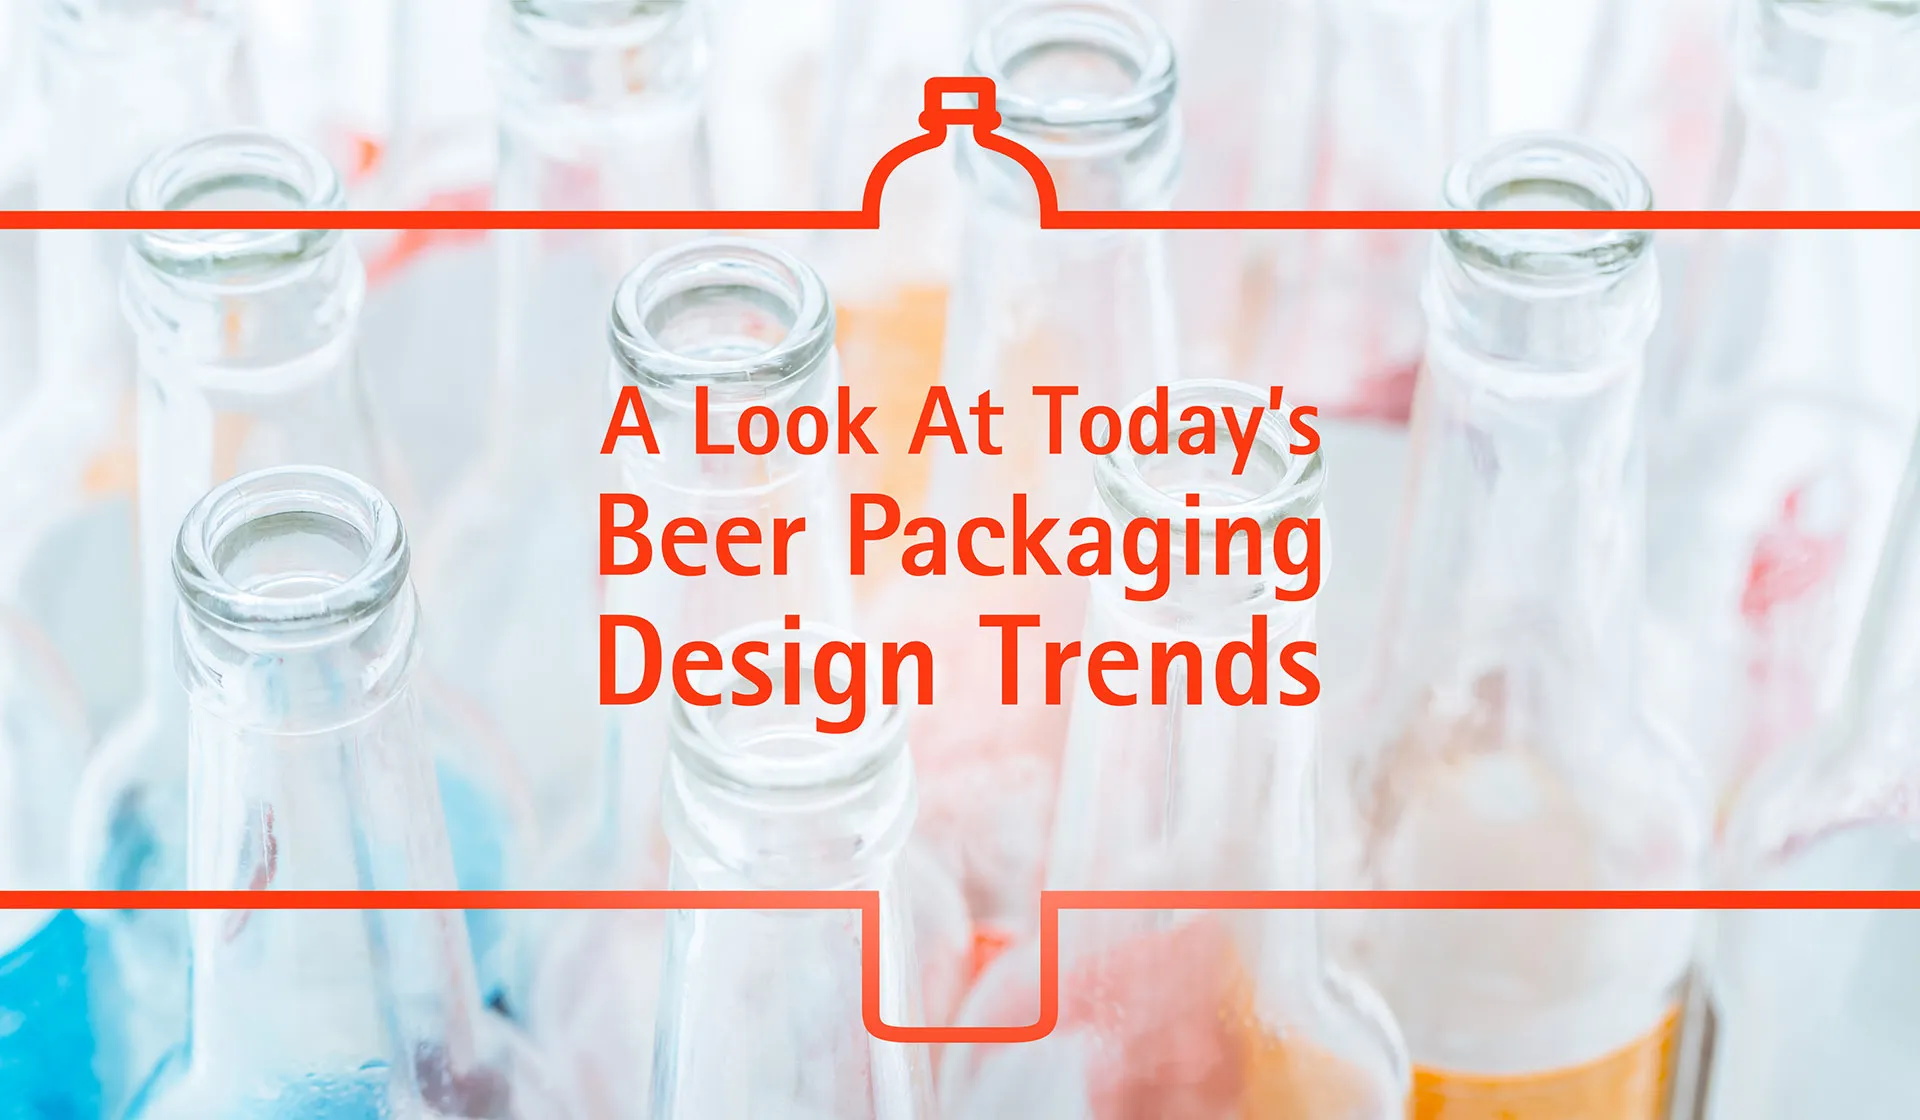 A look at today’s beer packaging design trends